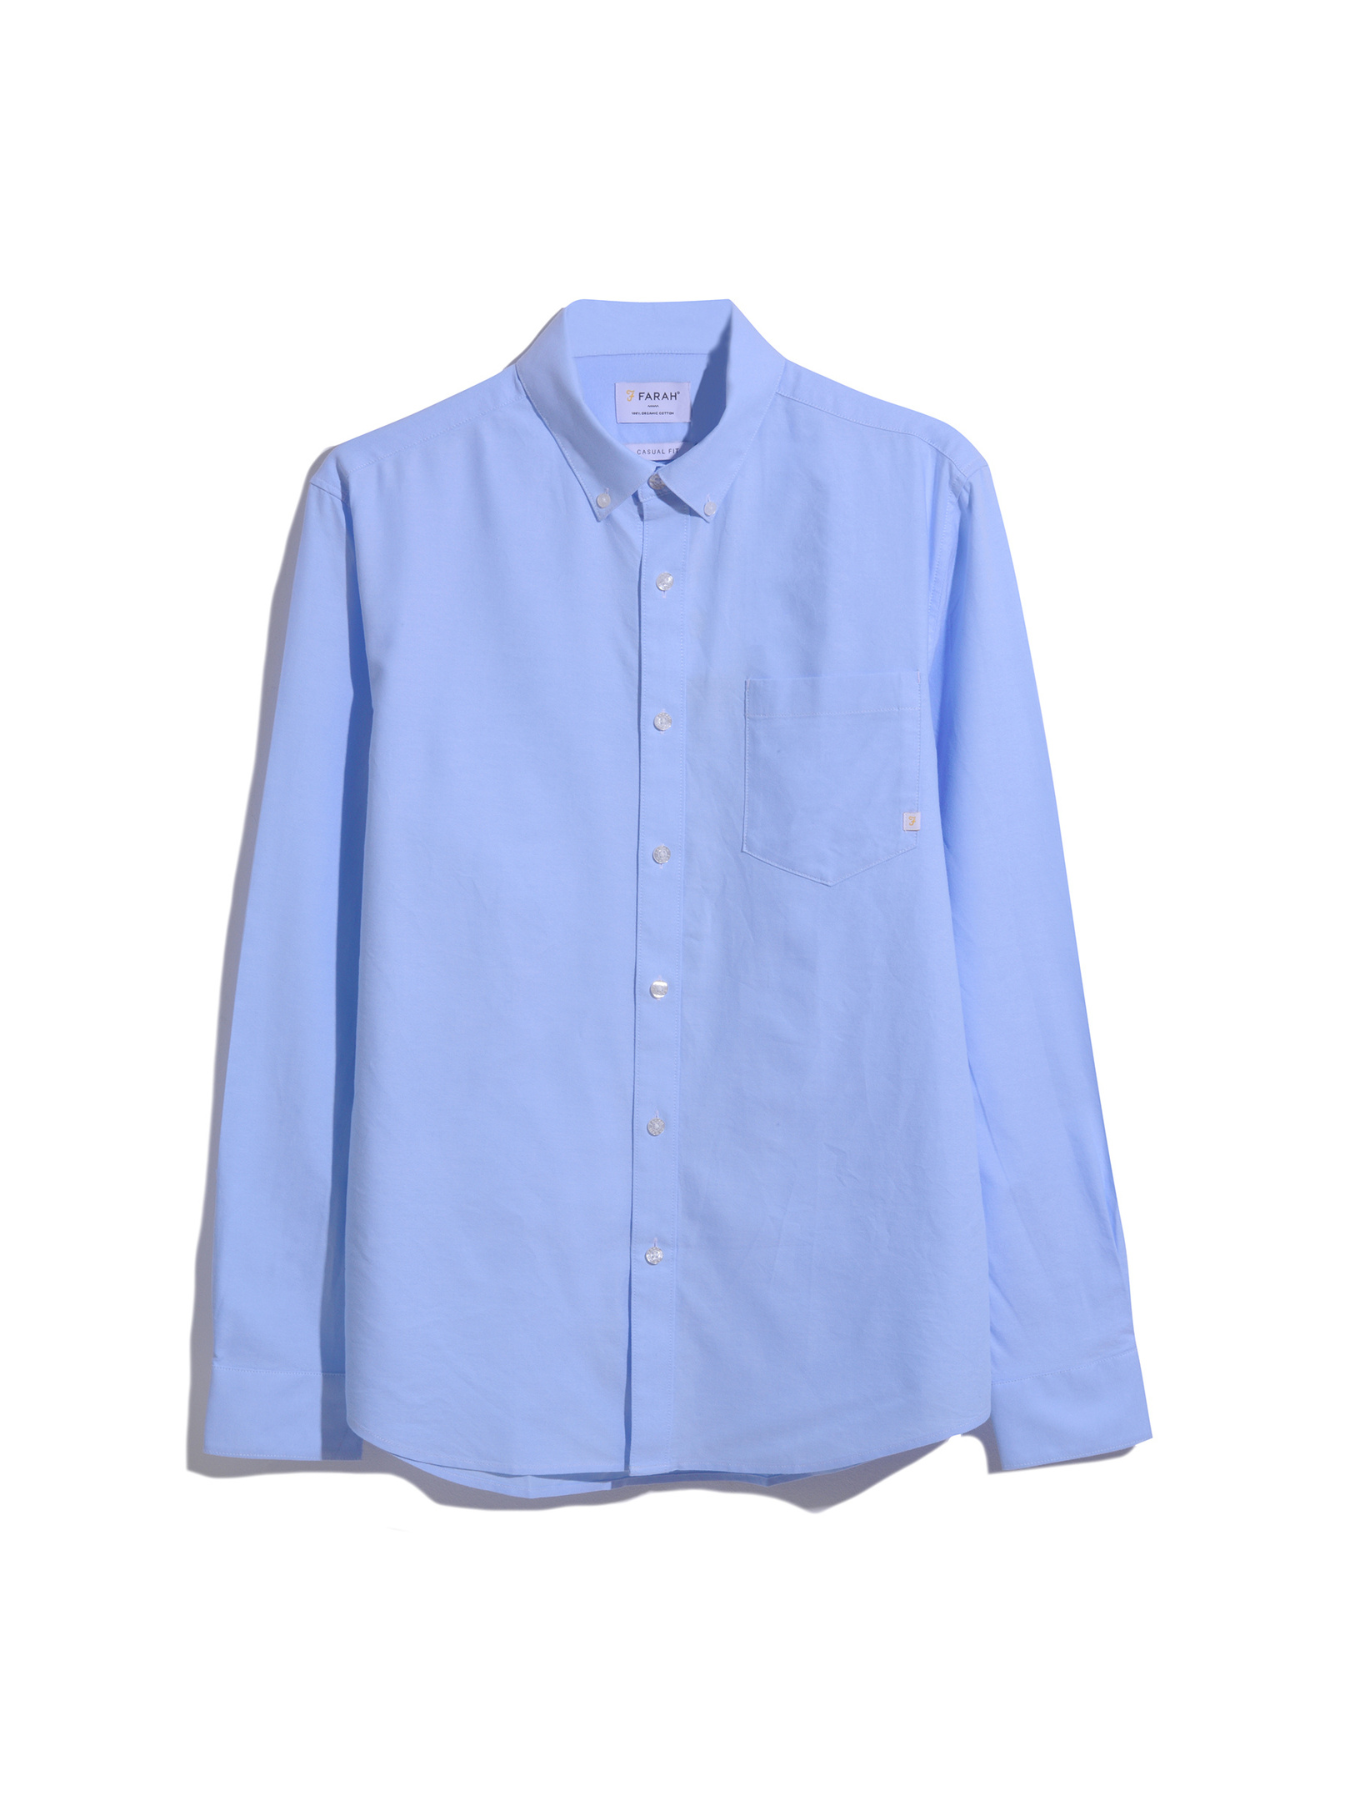 View Brewer Casual Fit Organic Cotton Long Sleeve Shirt In Sky Blue information